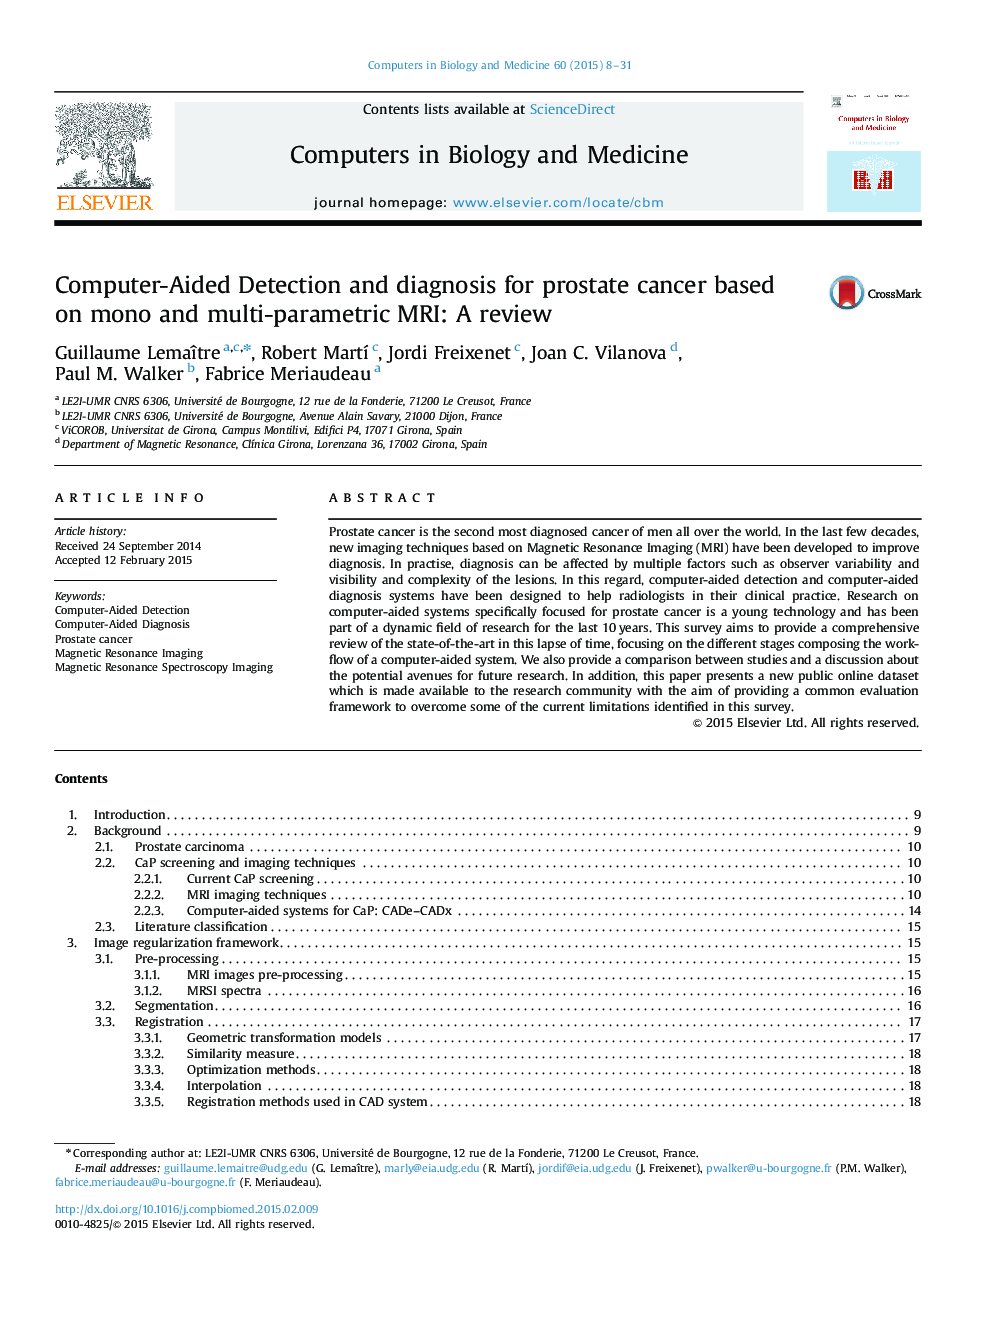 Computer-Aided Detection and diagnosis for prostate cancer based on mono and multi-parametric MRI: A review